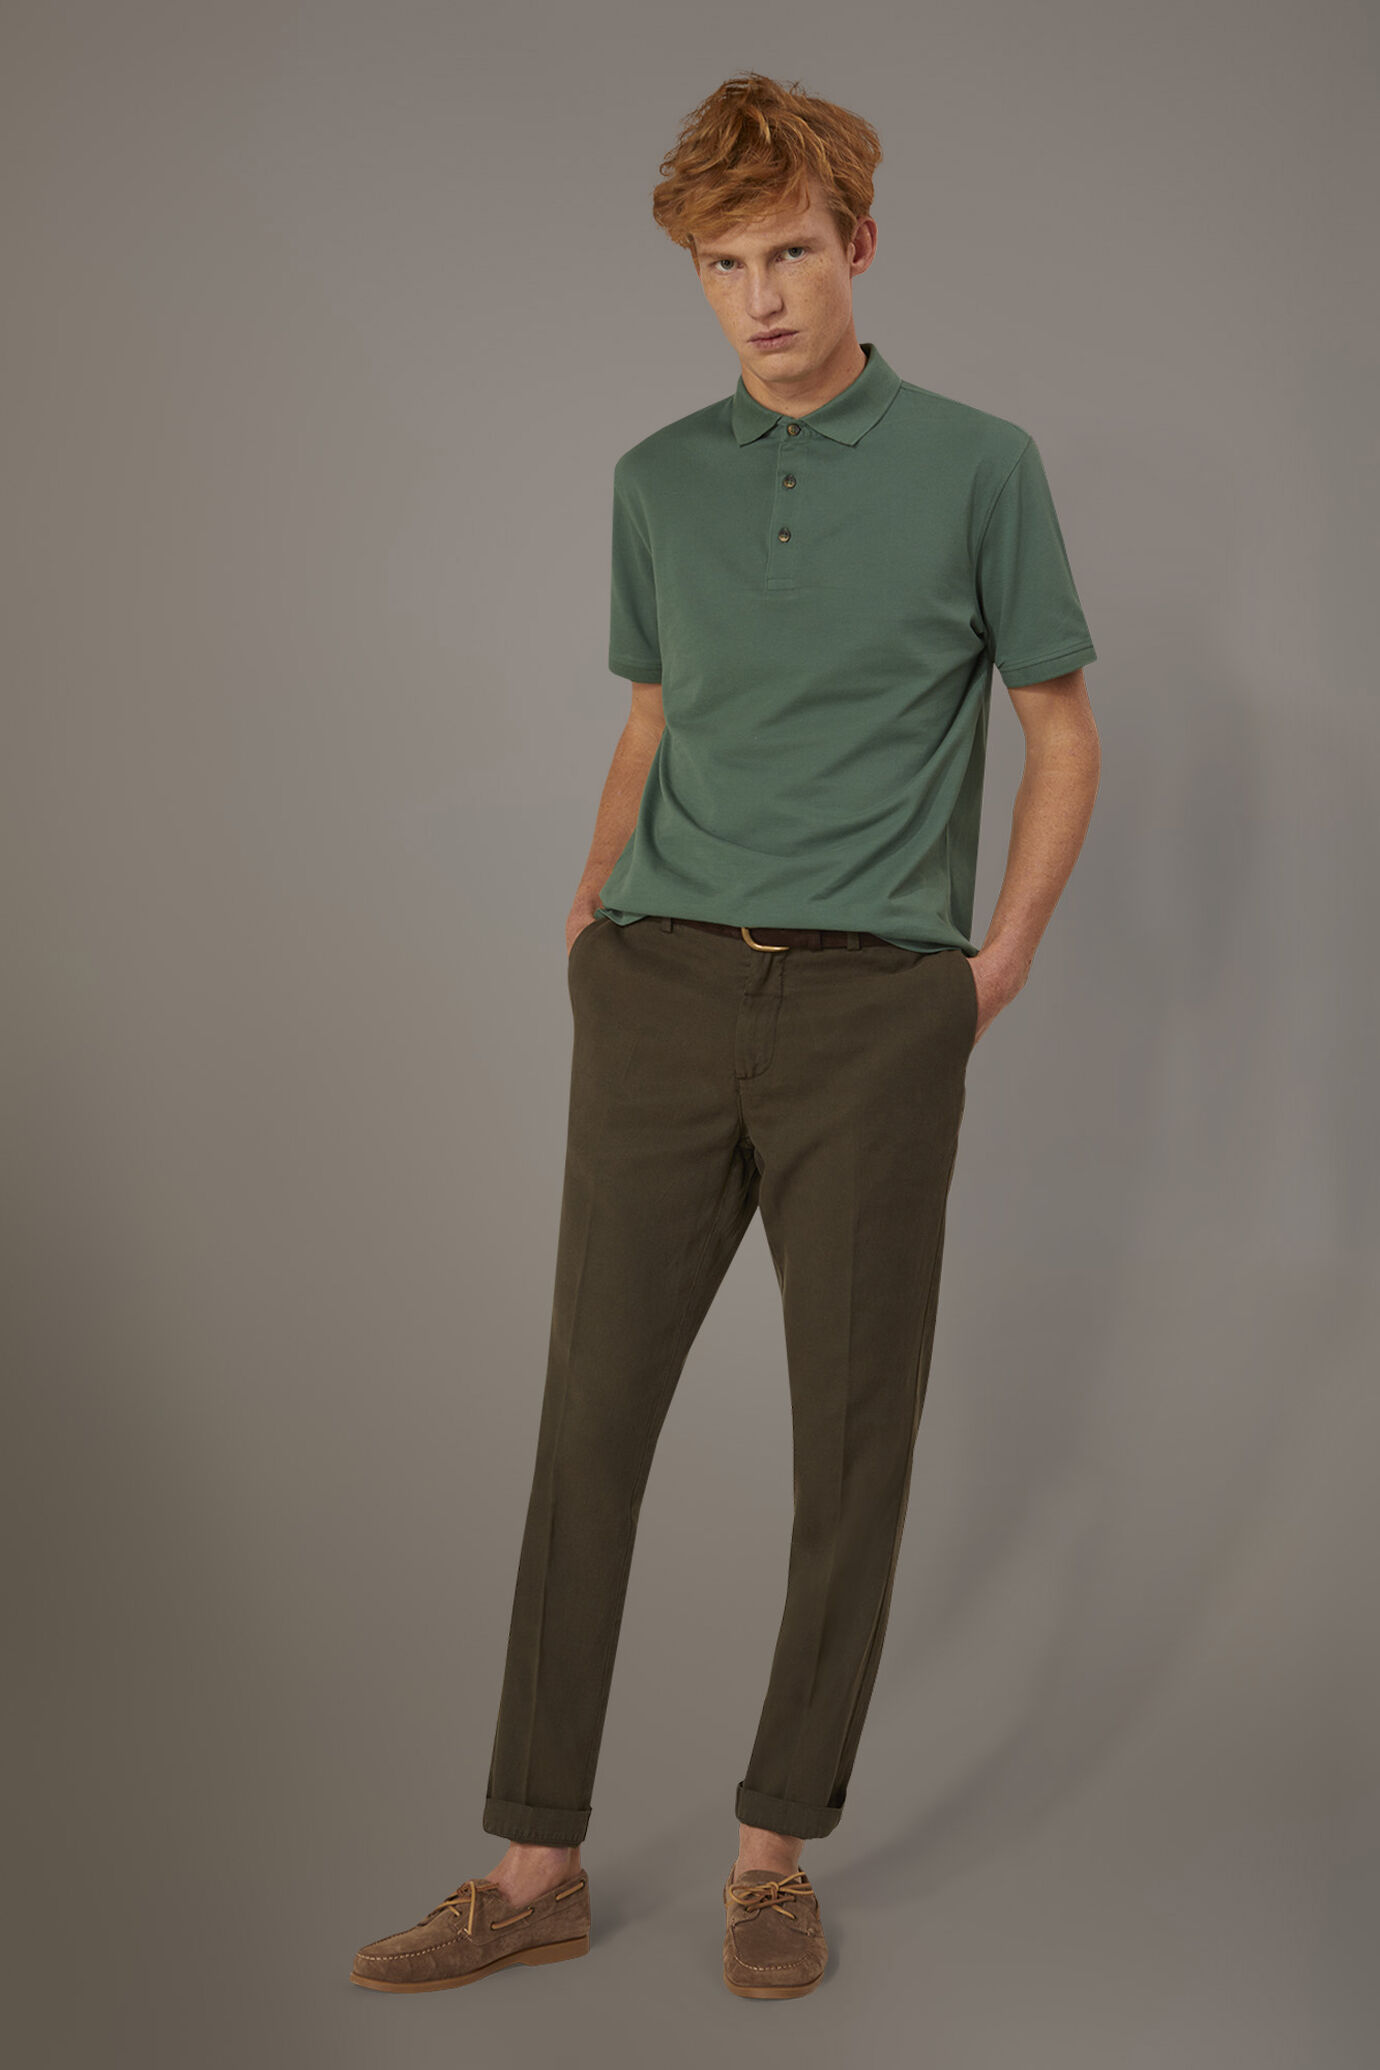 Regular fit linen blend chino trousers twill construction